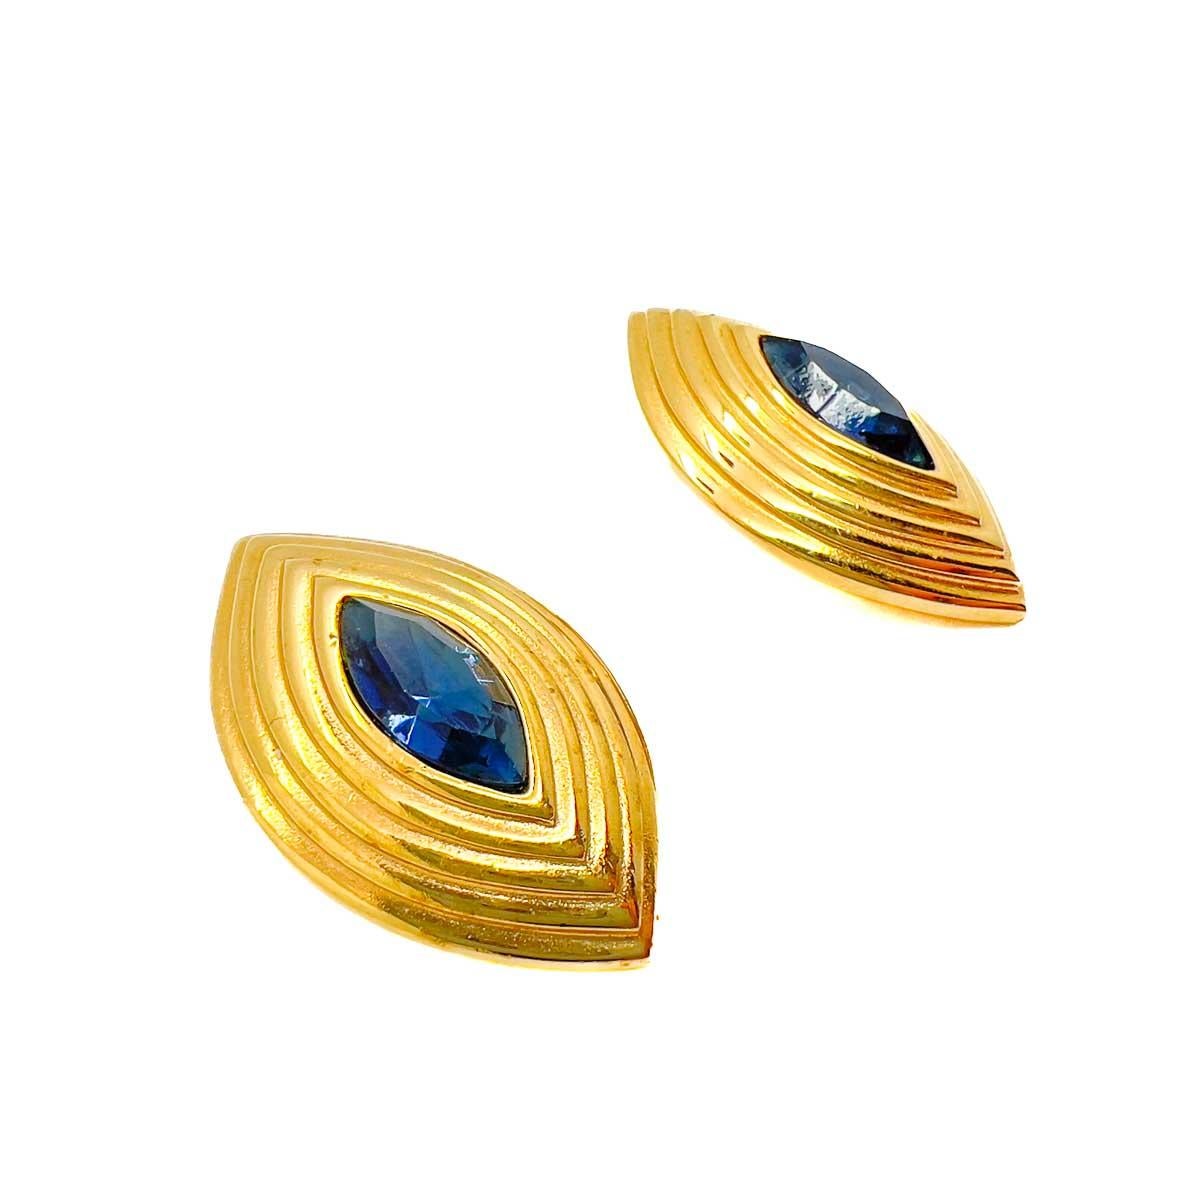 A pair of Vintage Givenchy Marquise Earrings. Featuring a lustrous metal tiered mount set with a classic sapphire marquise crystal. The epitome of couture chic that will elevate your look every time.
One of the late great 20th century couturiers,